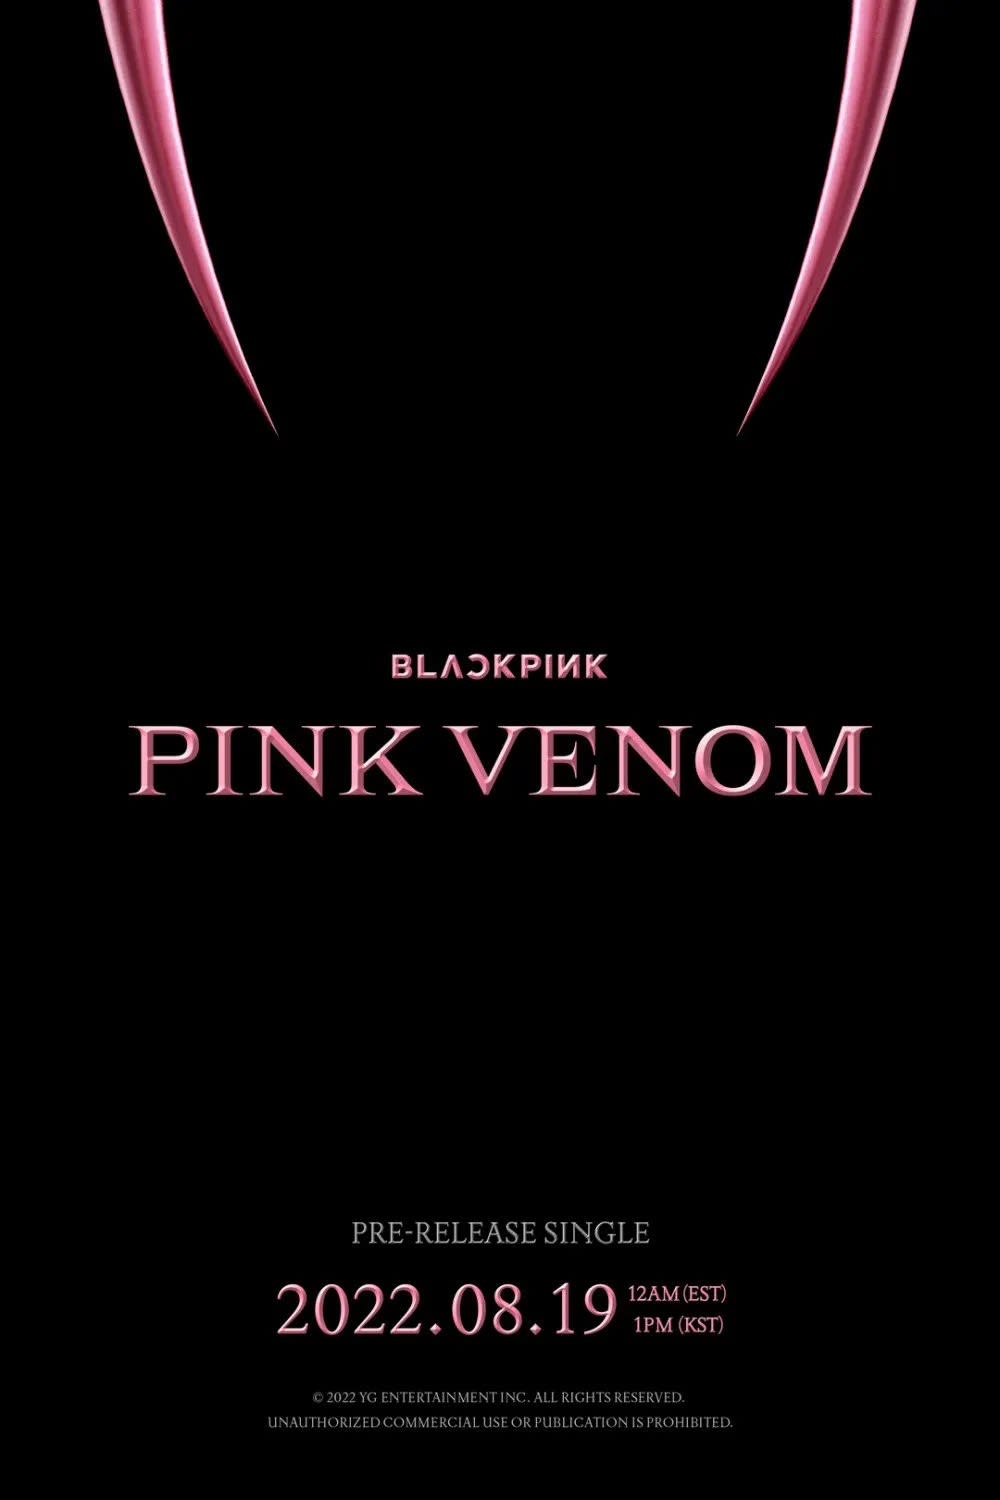 This is the date Blackpink will be releasing their new single, Pink Venom